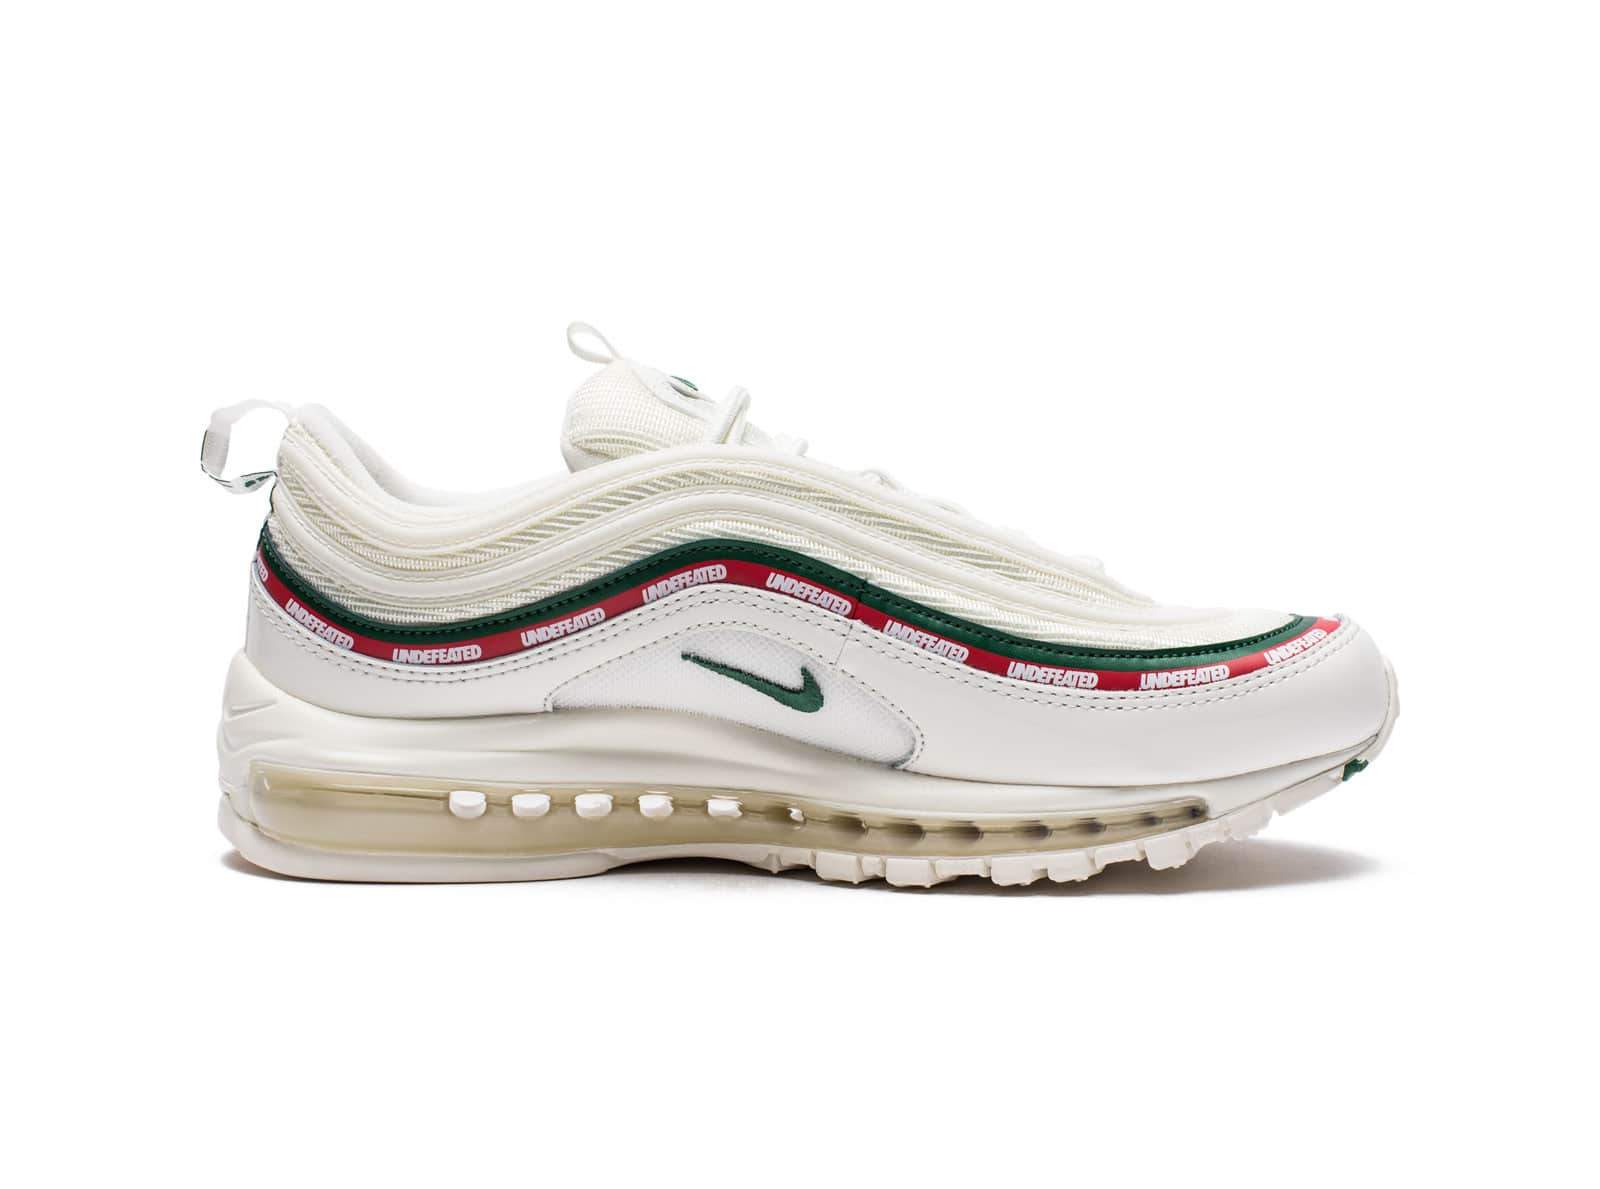 UNDEFEATED X NIKE AIR MAX 97 OG - SAIL/SPEED RED/WHITE/GORGE GREEN